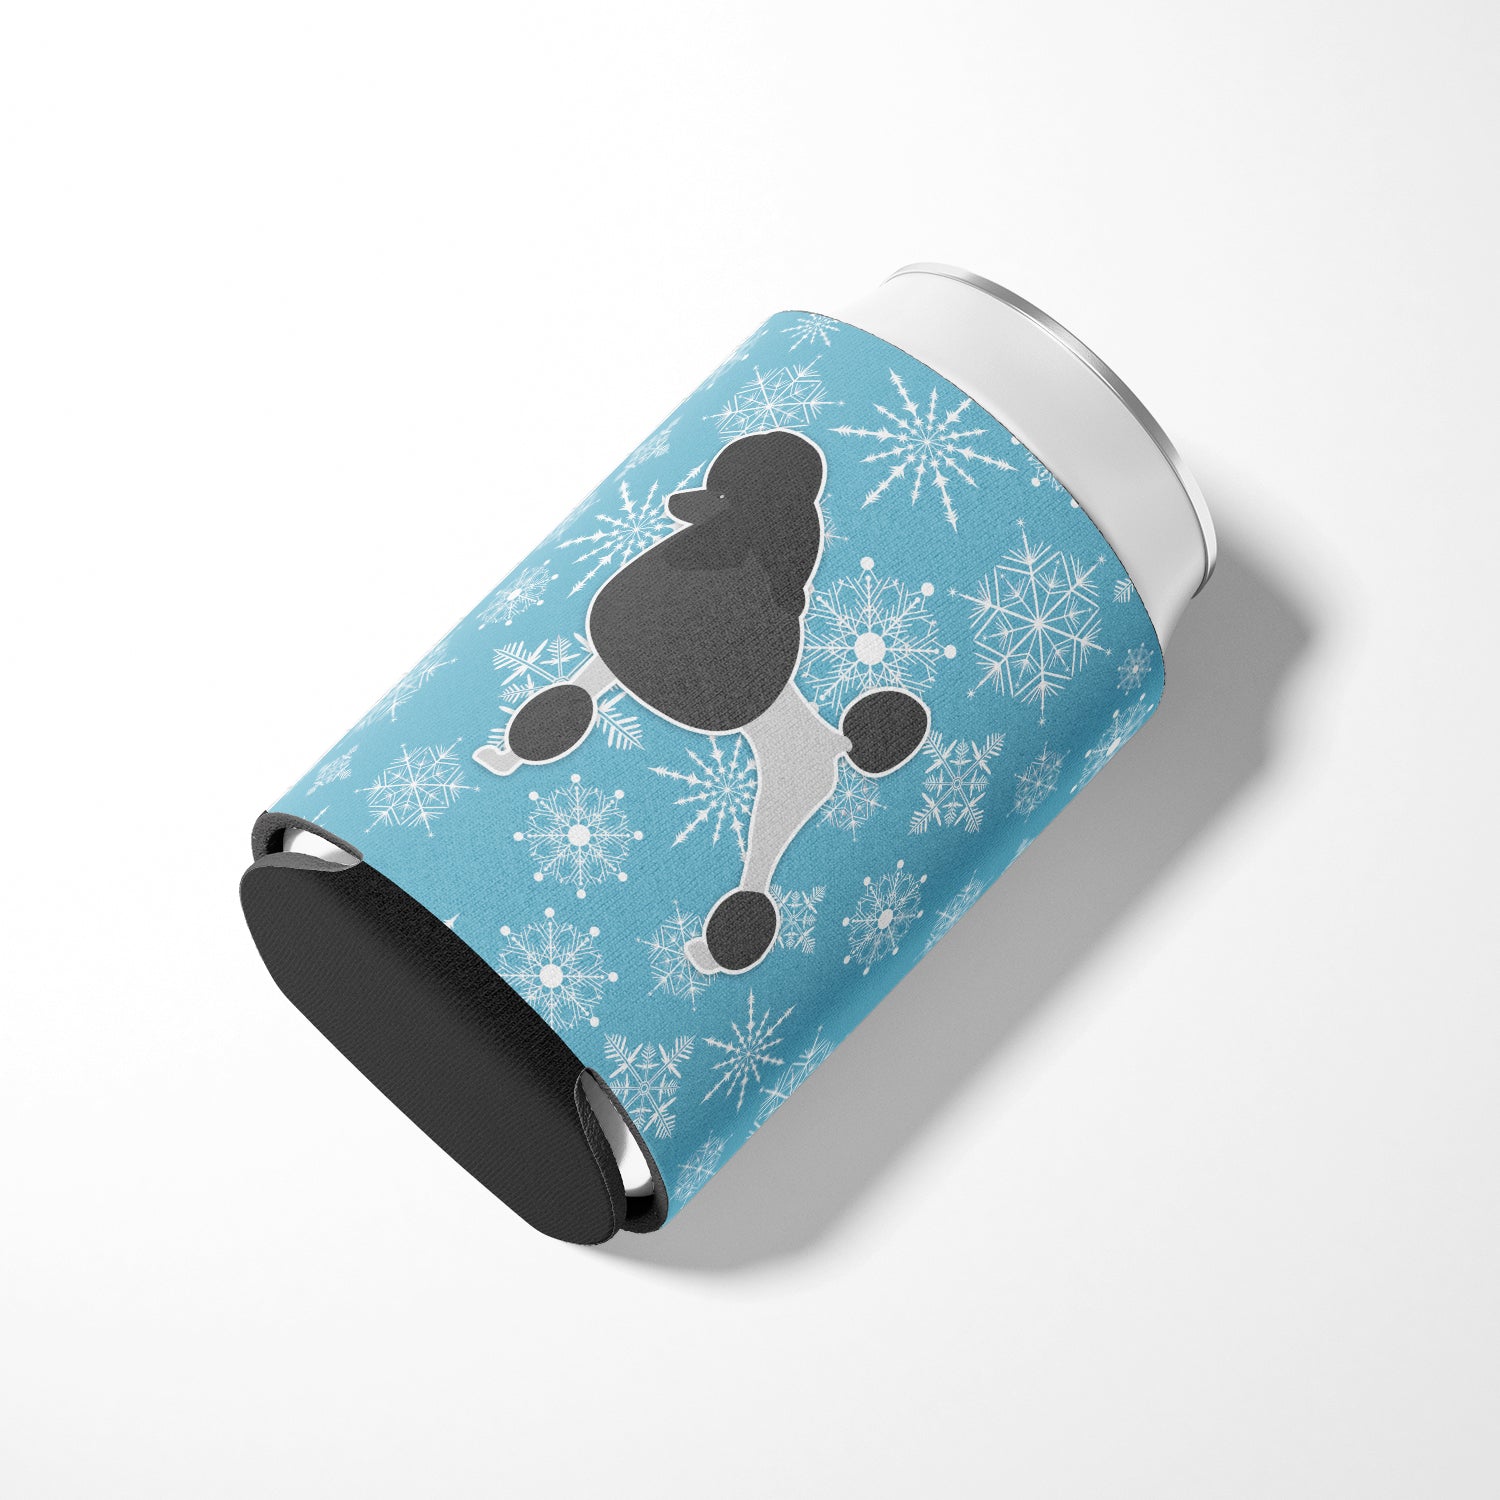 Winter Snowflake Poodle Can or Bottle Hugger BB3539CC